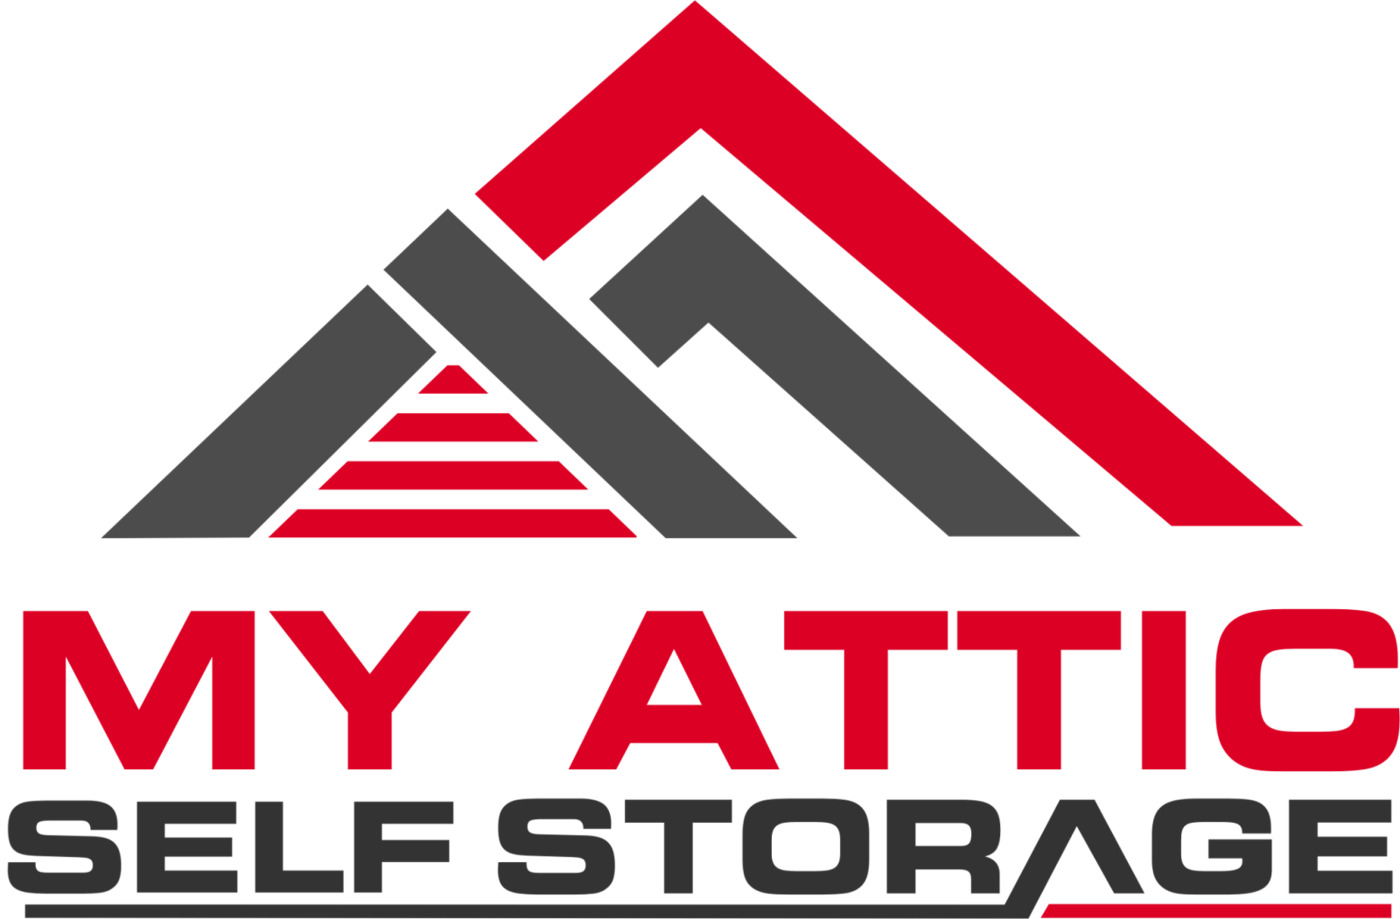 My Attic Storage is a trusted self-storage facility in Toccoa, GA.